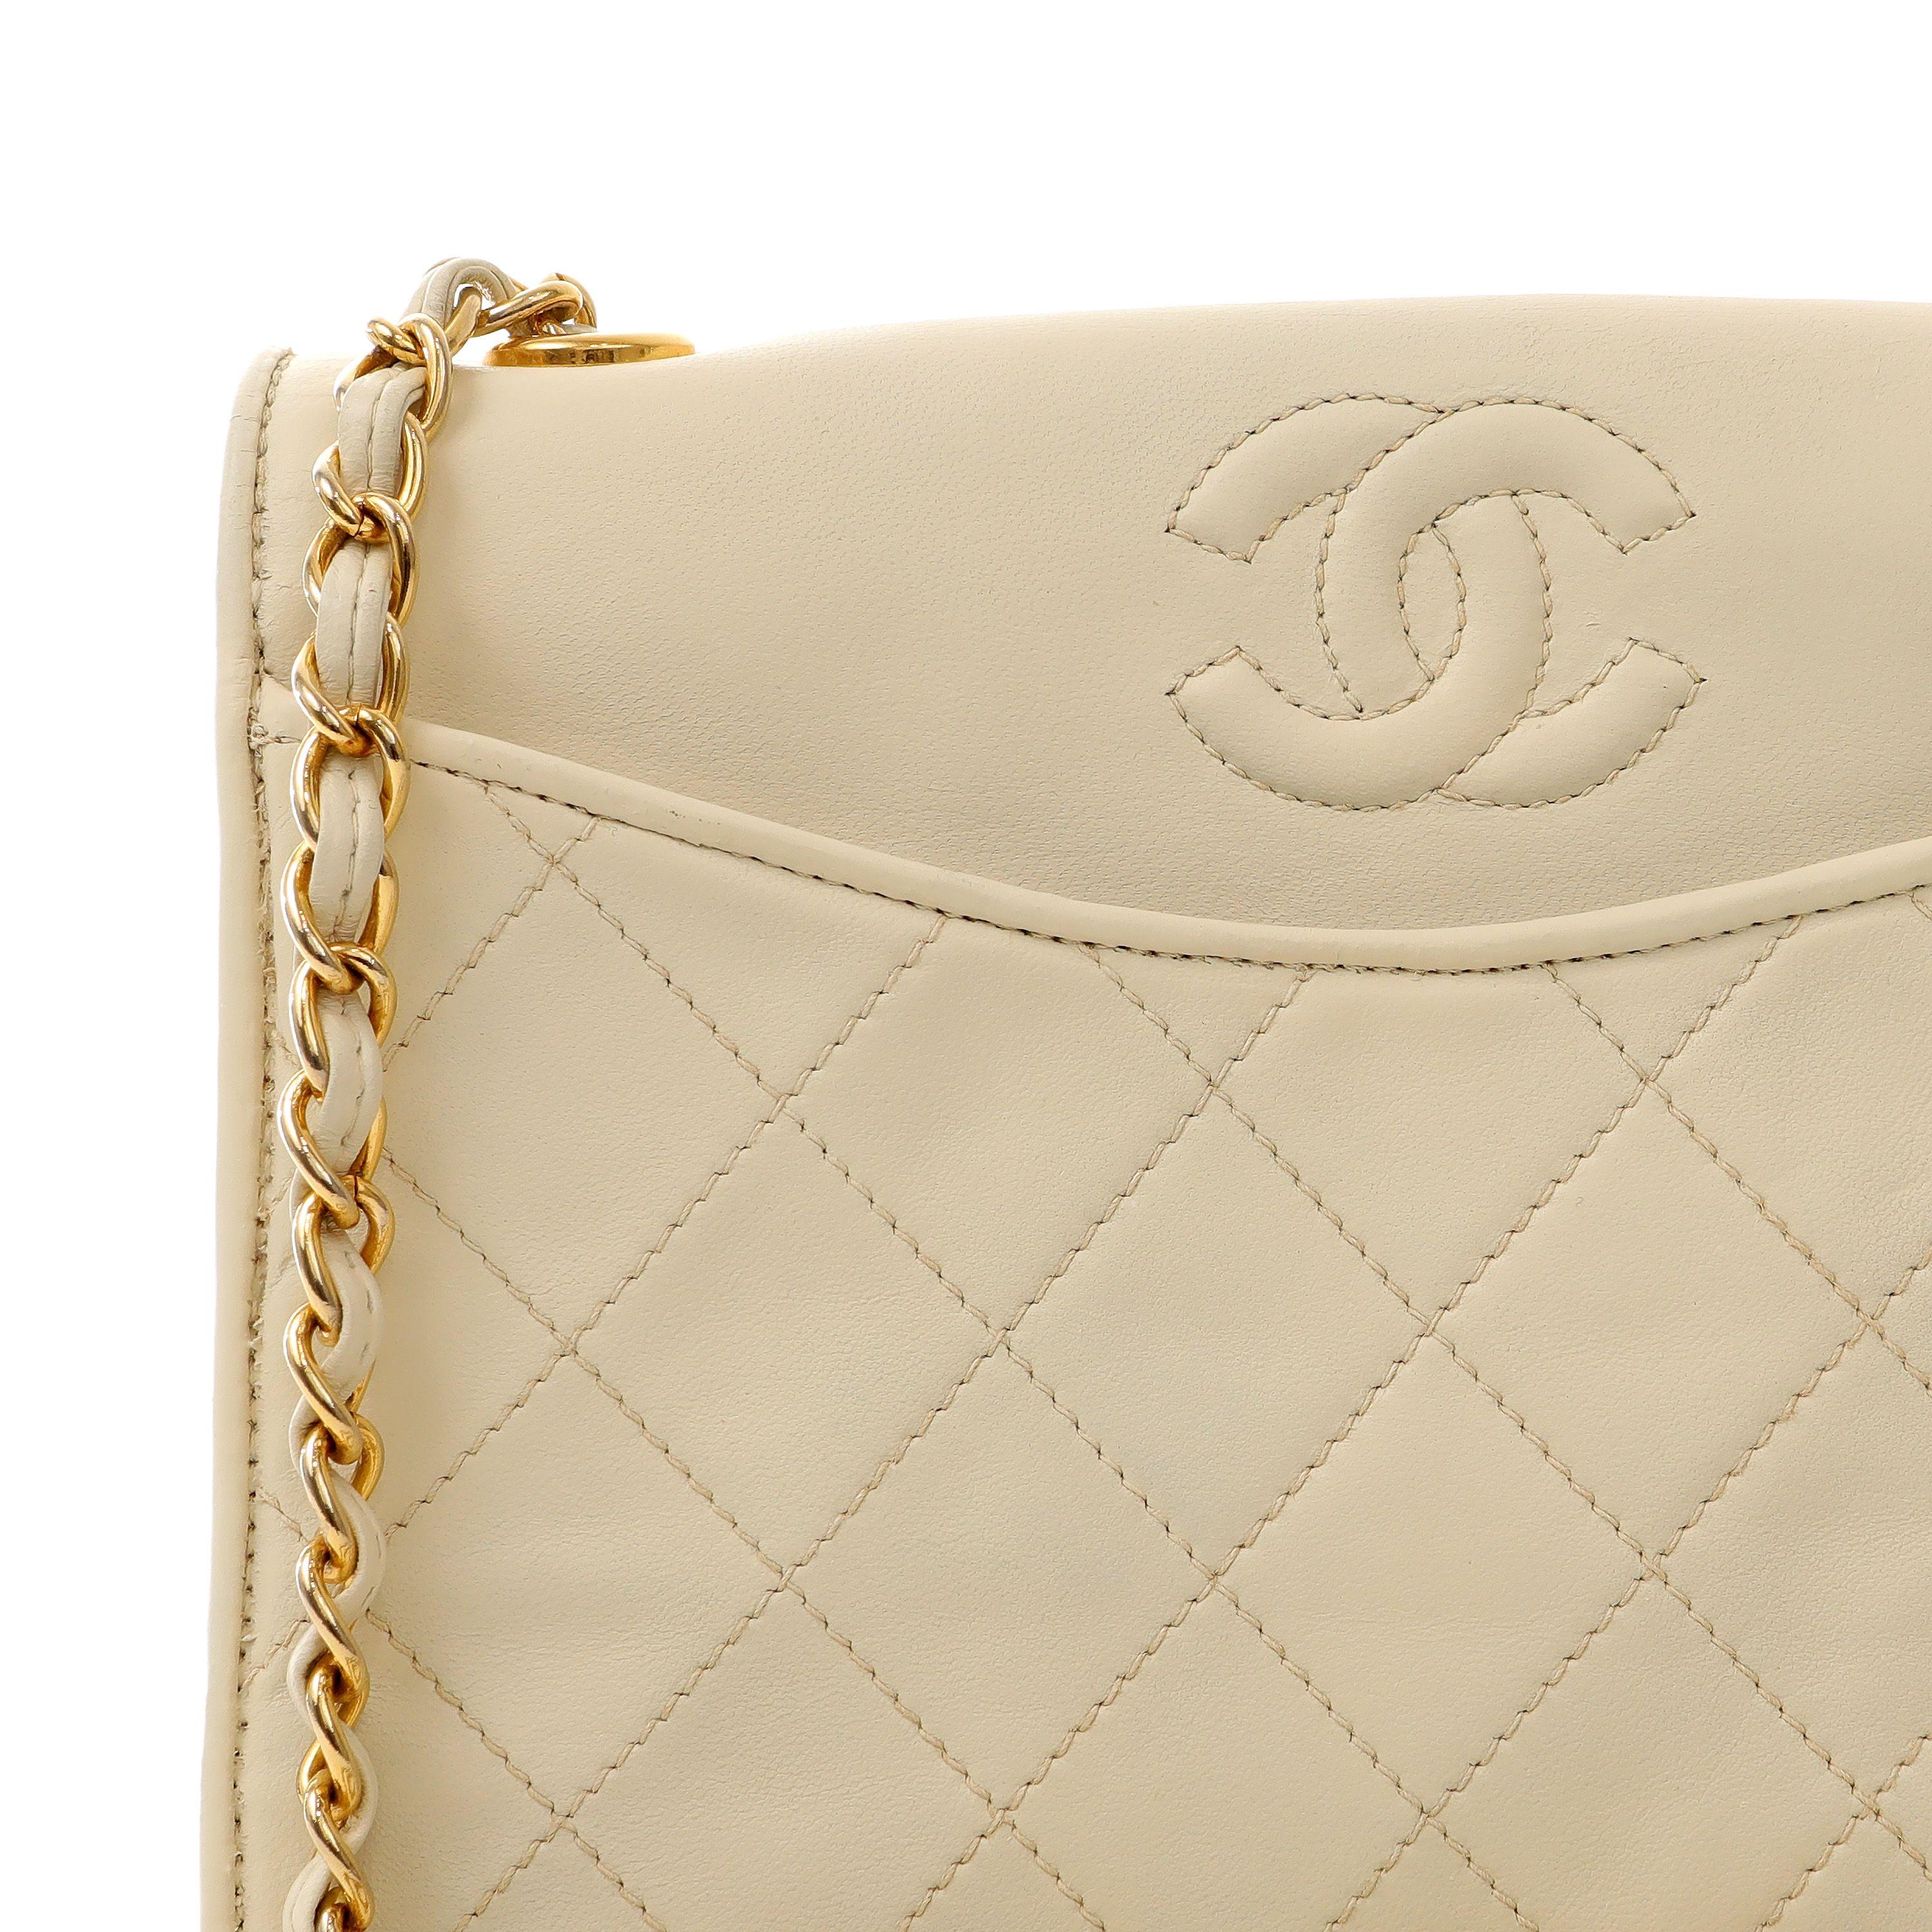 Chanel Vintage Ivory Lambskin Crossbody Bag with Gold Hardware In Good Condition For Sale In Palm Beach, FL